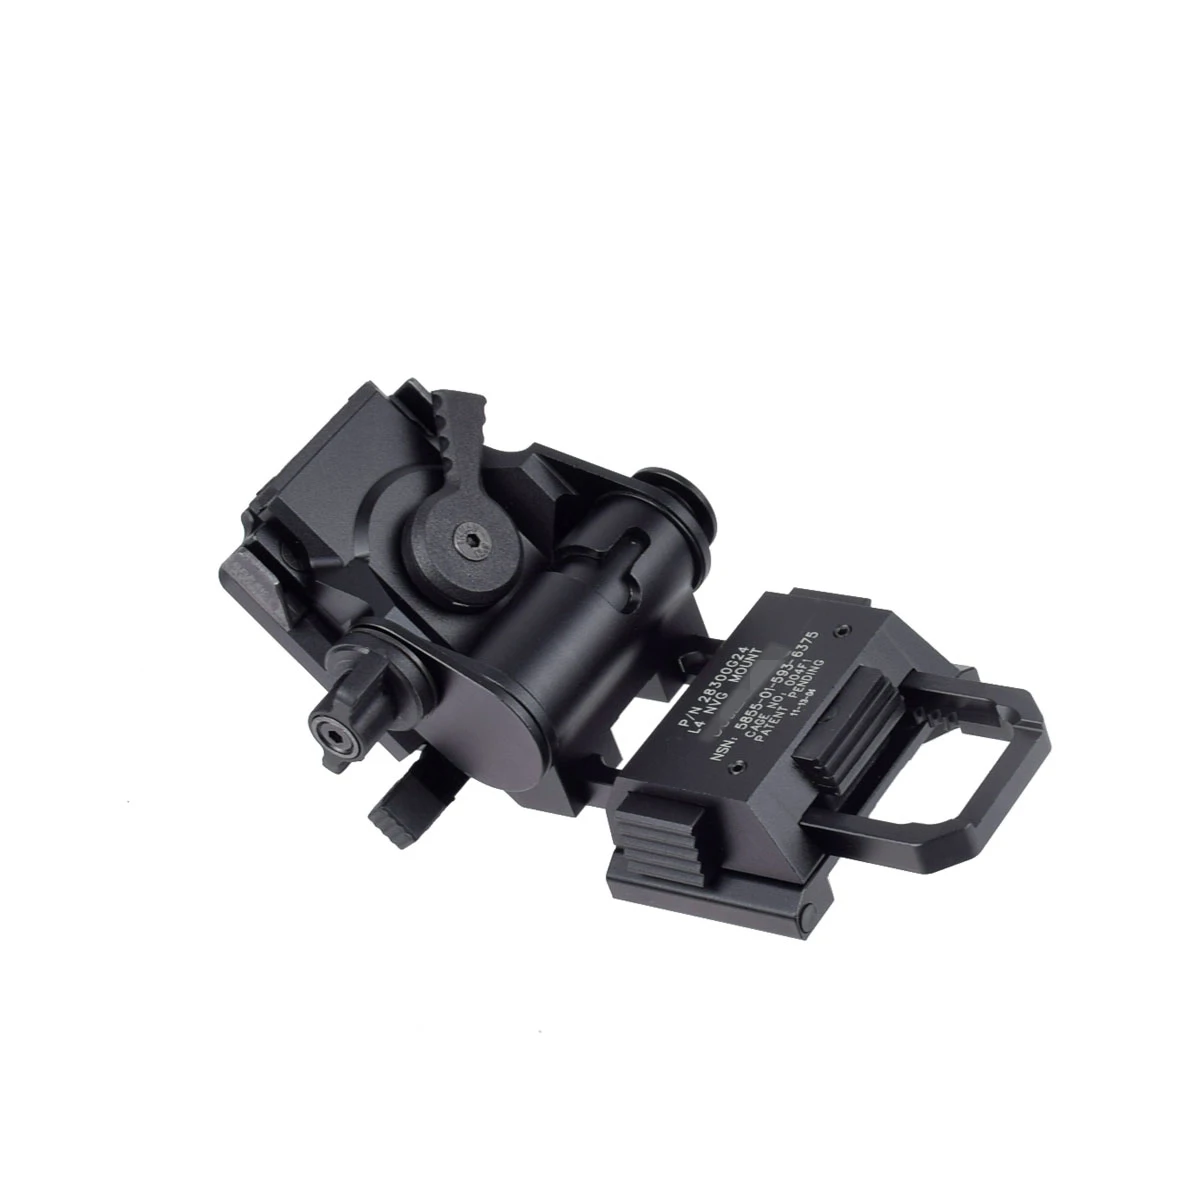 Sotac Wilcox L4G24 NVG Helmet Mounting Bracket PVS15 PVS18 Night Vision Telescopic Seat Quick Disassembly Accessories